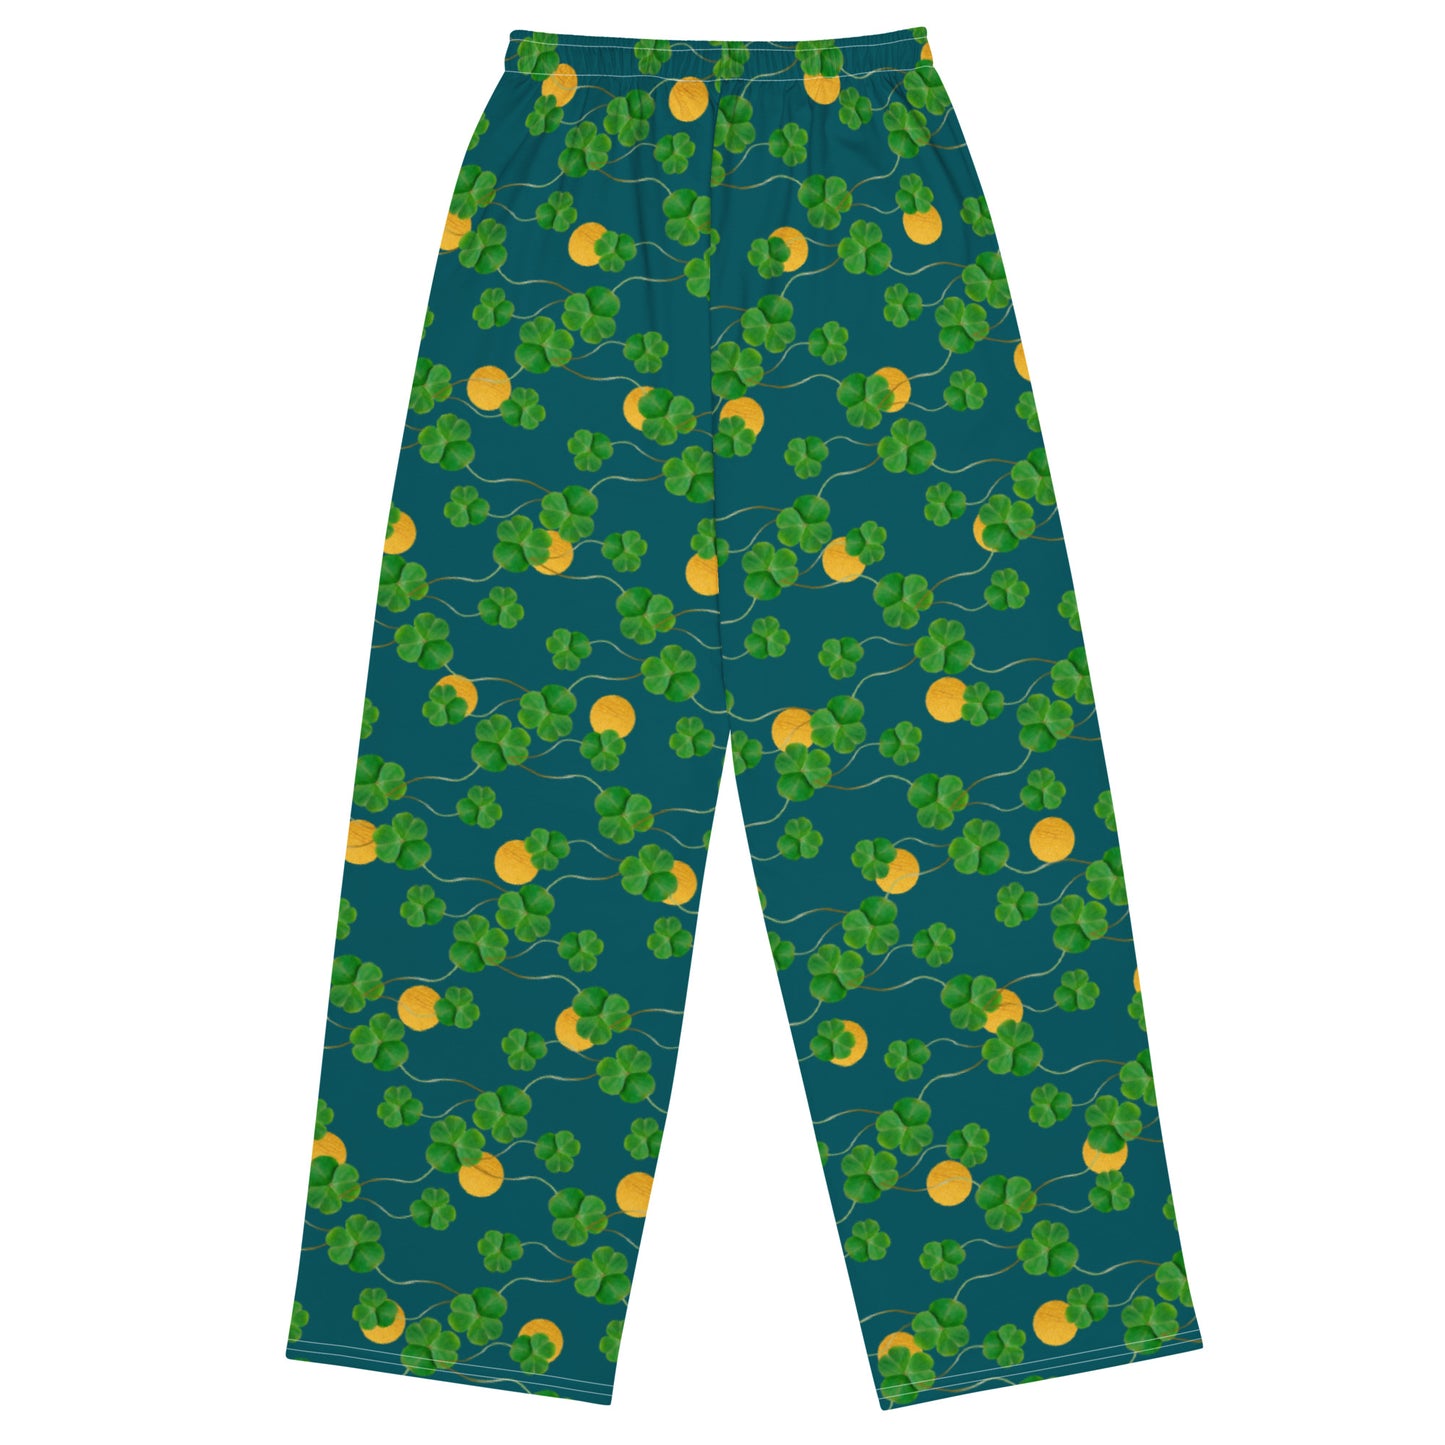 Unisex wide leg pants with side pockets, elastic waistband and drawstring.  Design features pattern of three-leaf clover and lucky gold coins on a blue-green background. Flat lay view.